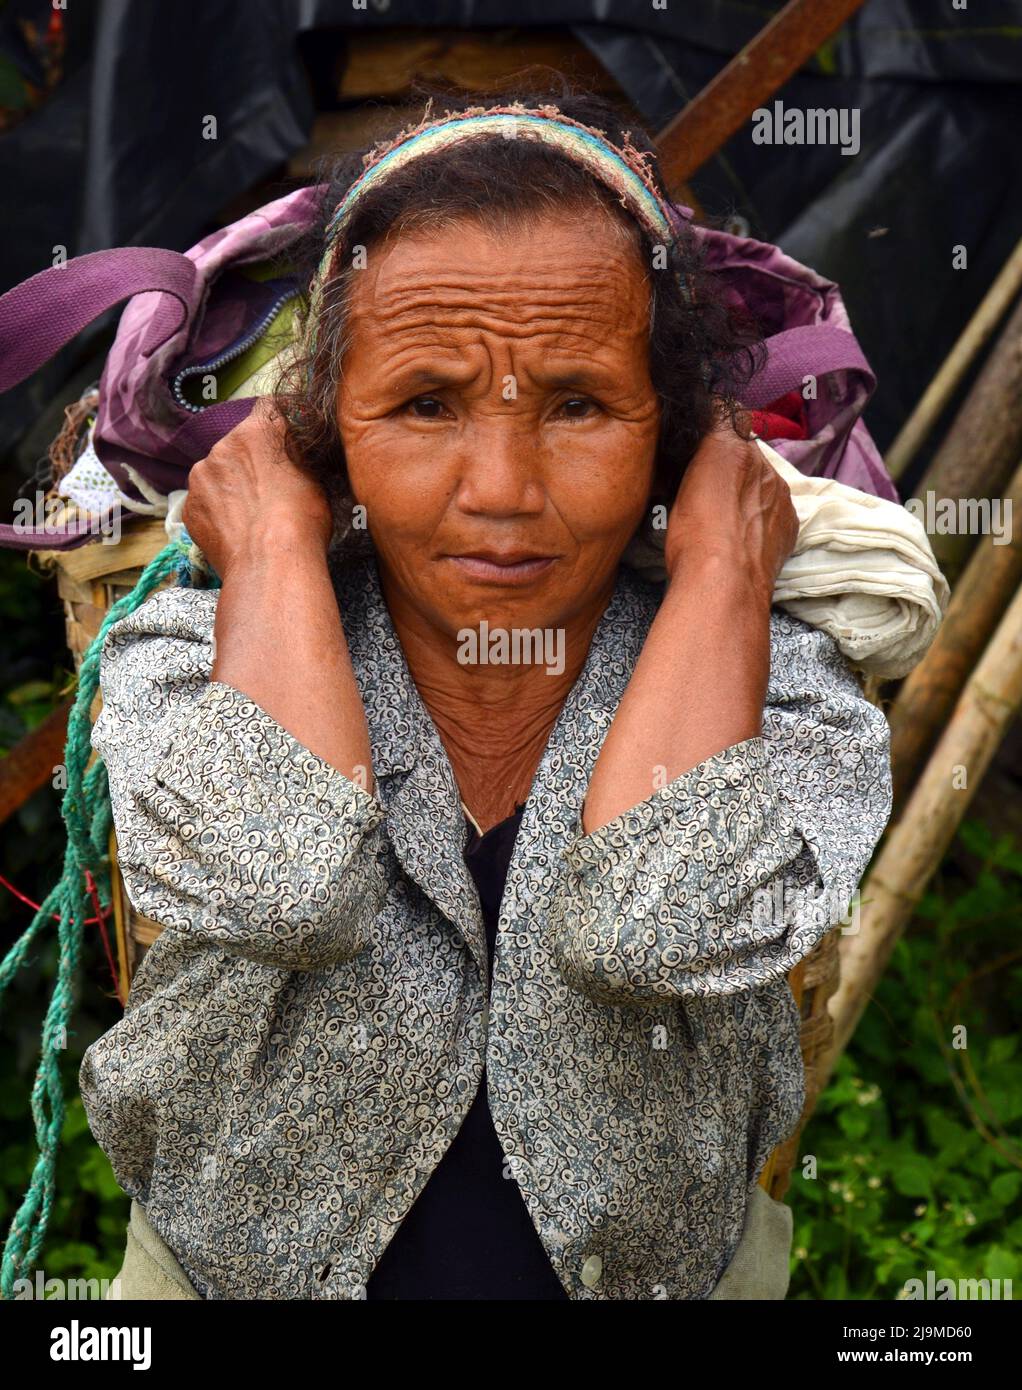 POTRAIT OF A TEA PLUCKER WITH TEA LEAVES PLUCKING BAG ON SHOULDER, CAPTURED AT DARJEELING ,INDIA, ON SEP 24TH, 2016. Stock Photo